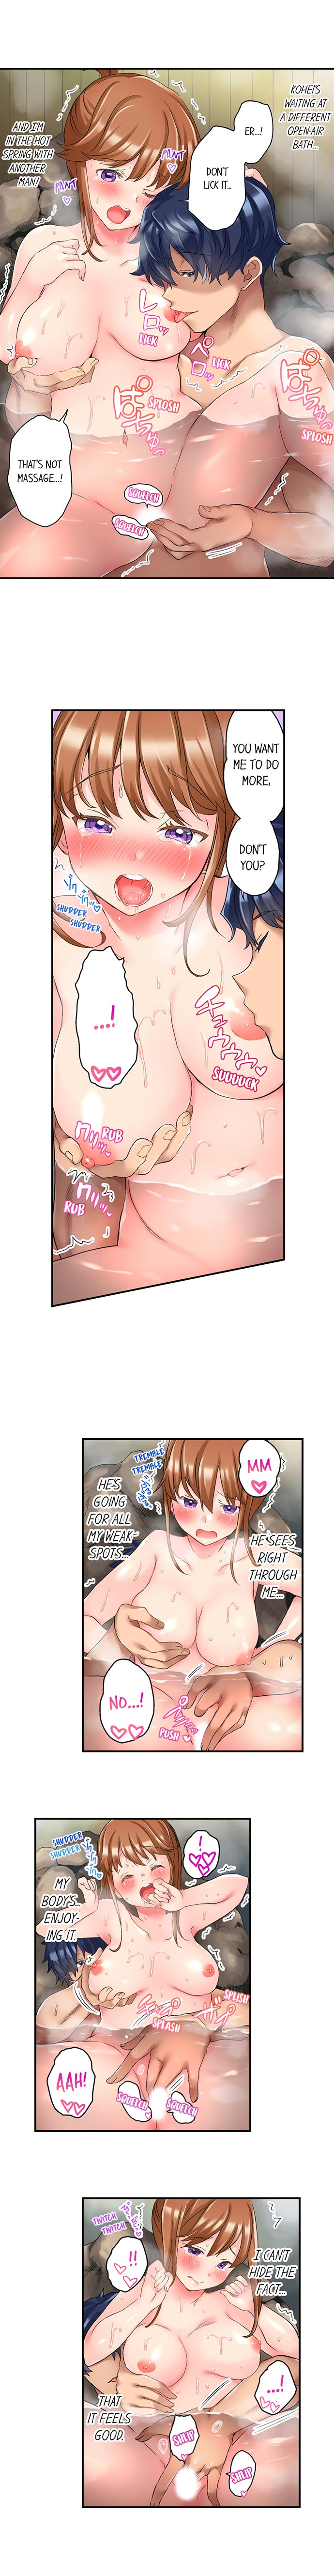 NTR Massage Chapter 9 - Page 2